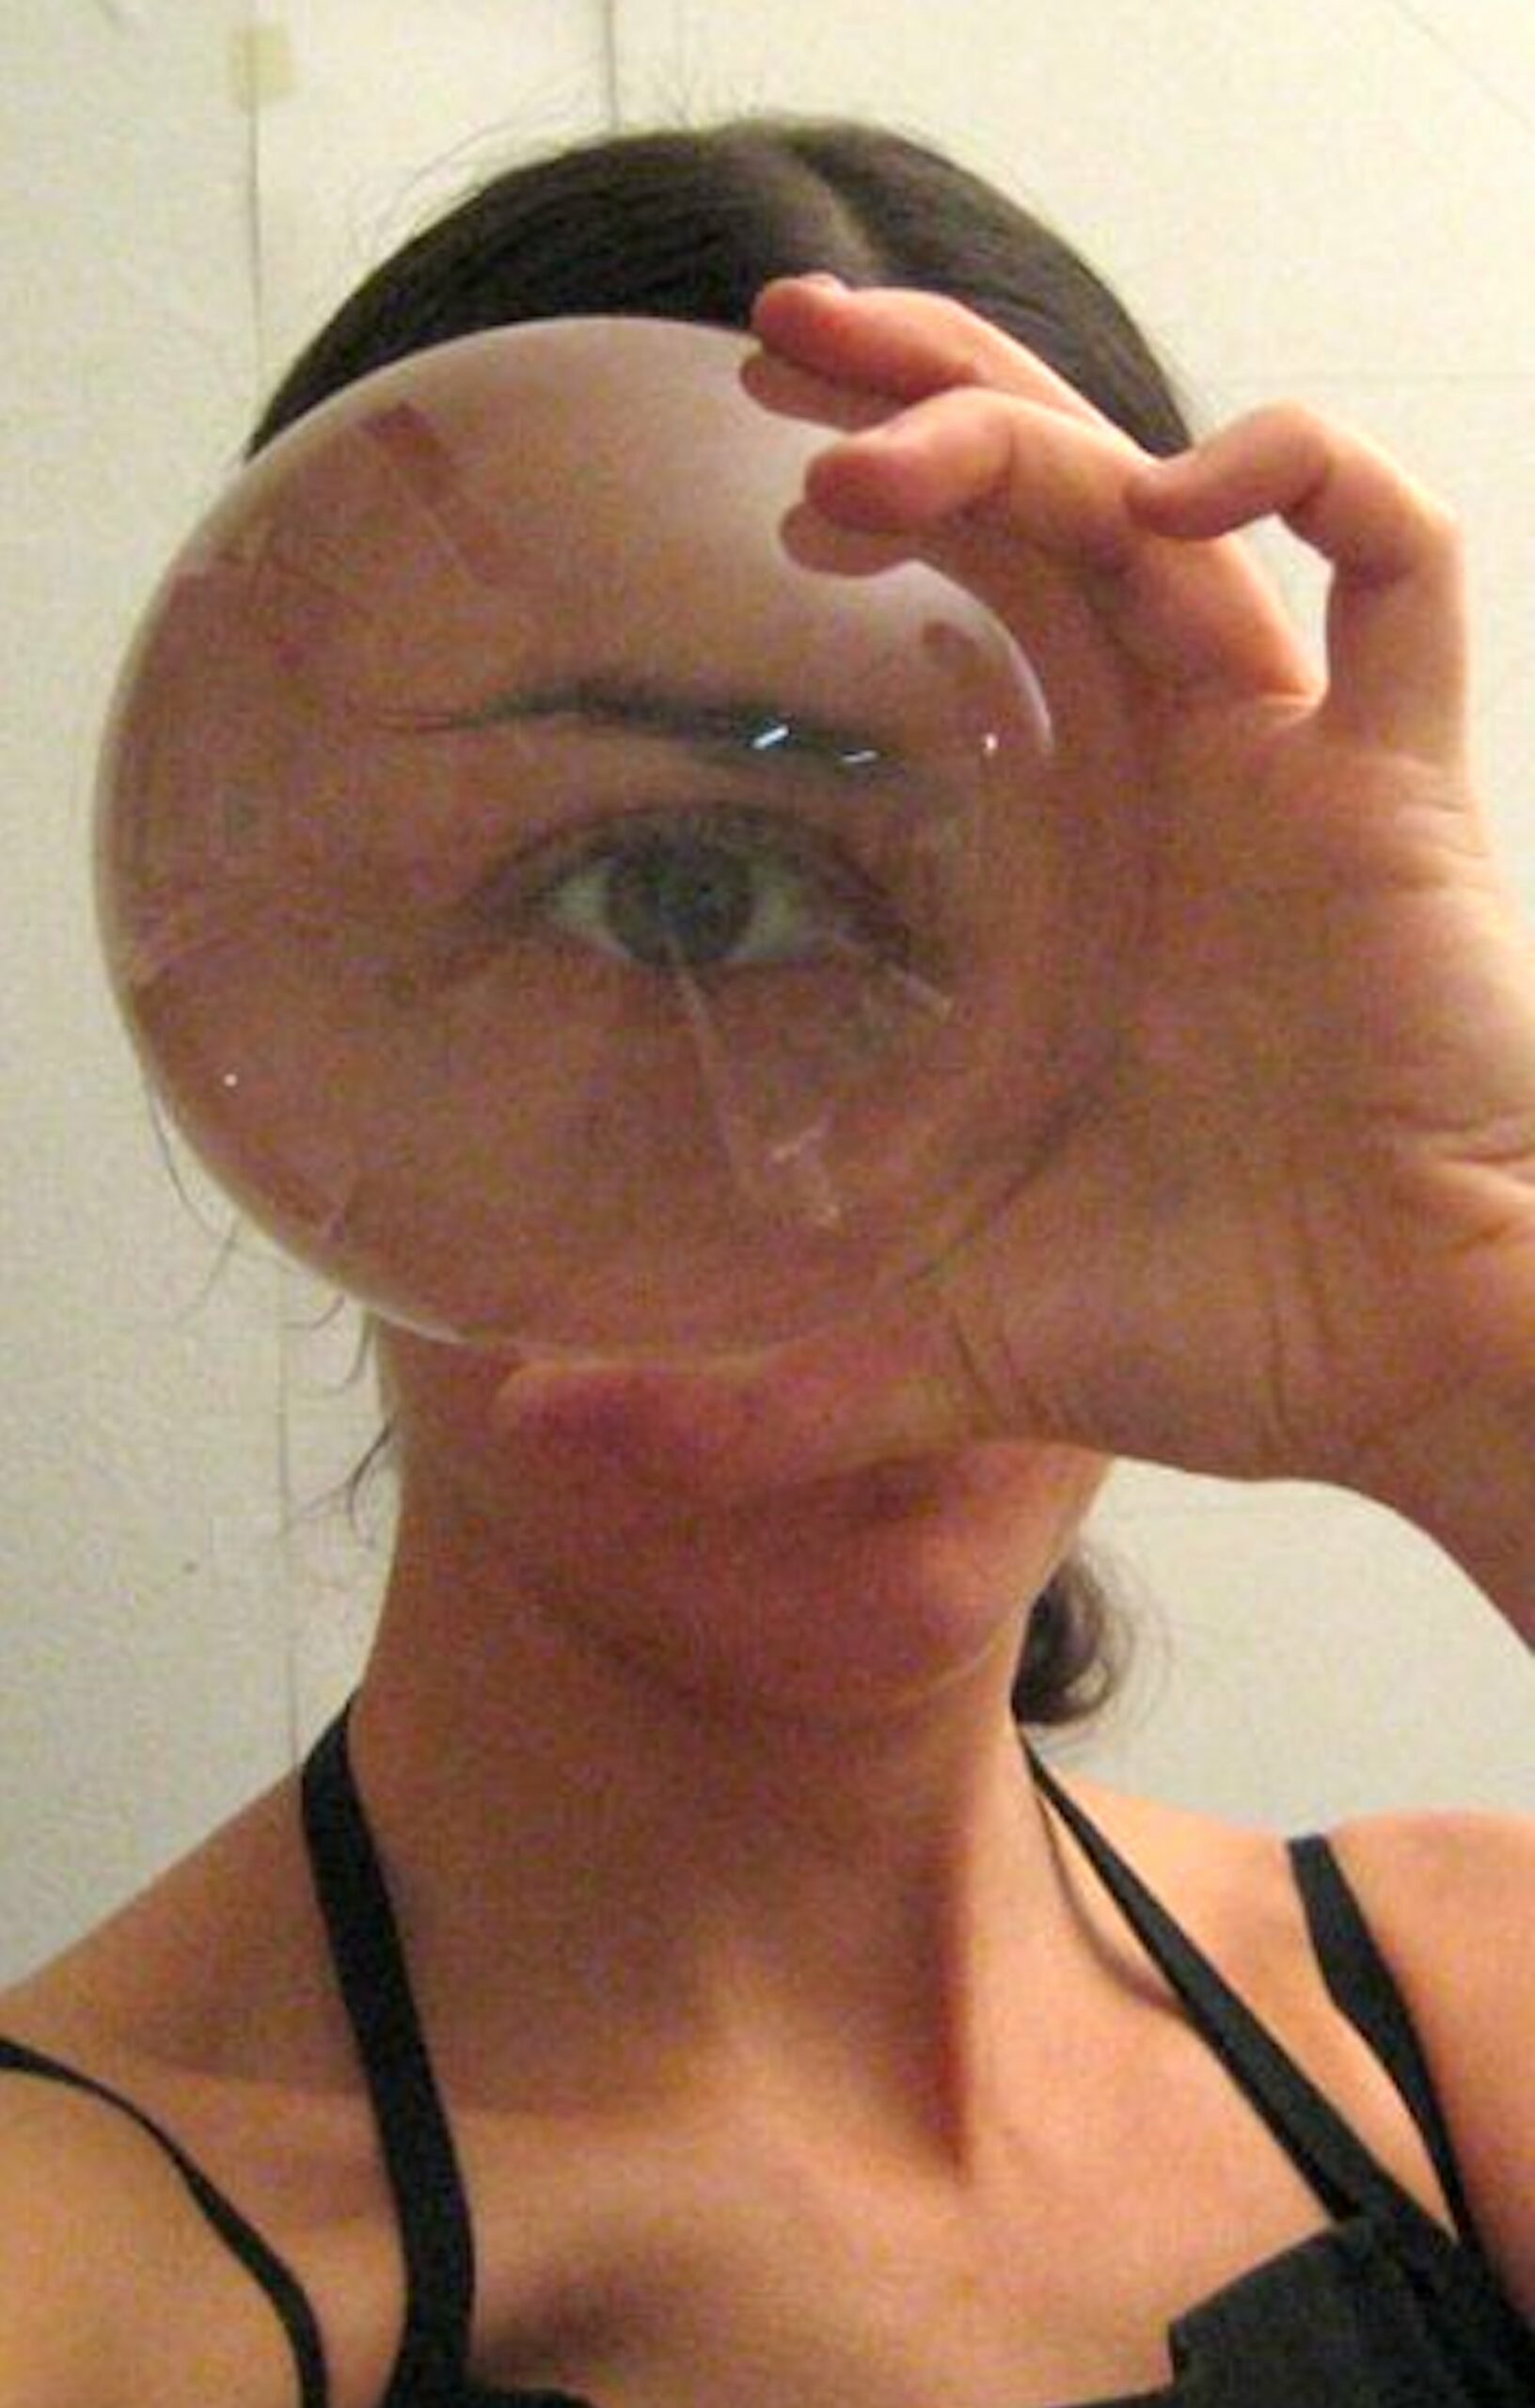 Alta hold a glass sphere in front of their eye, magnifying their eye so it takes up their whole face.